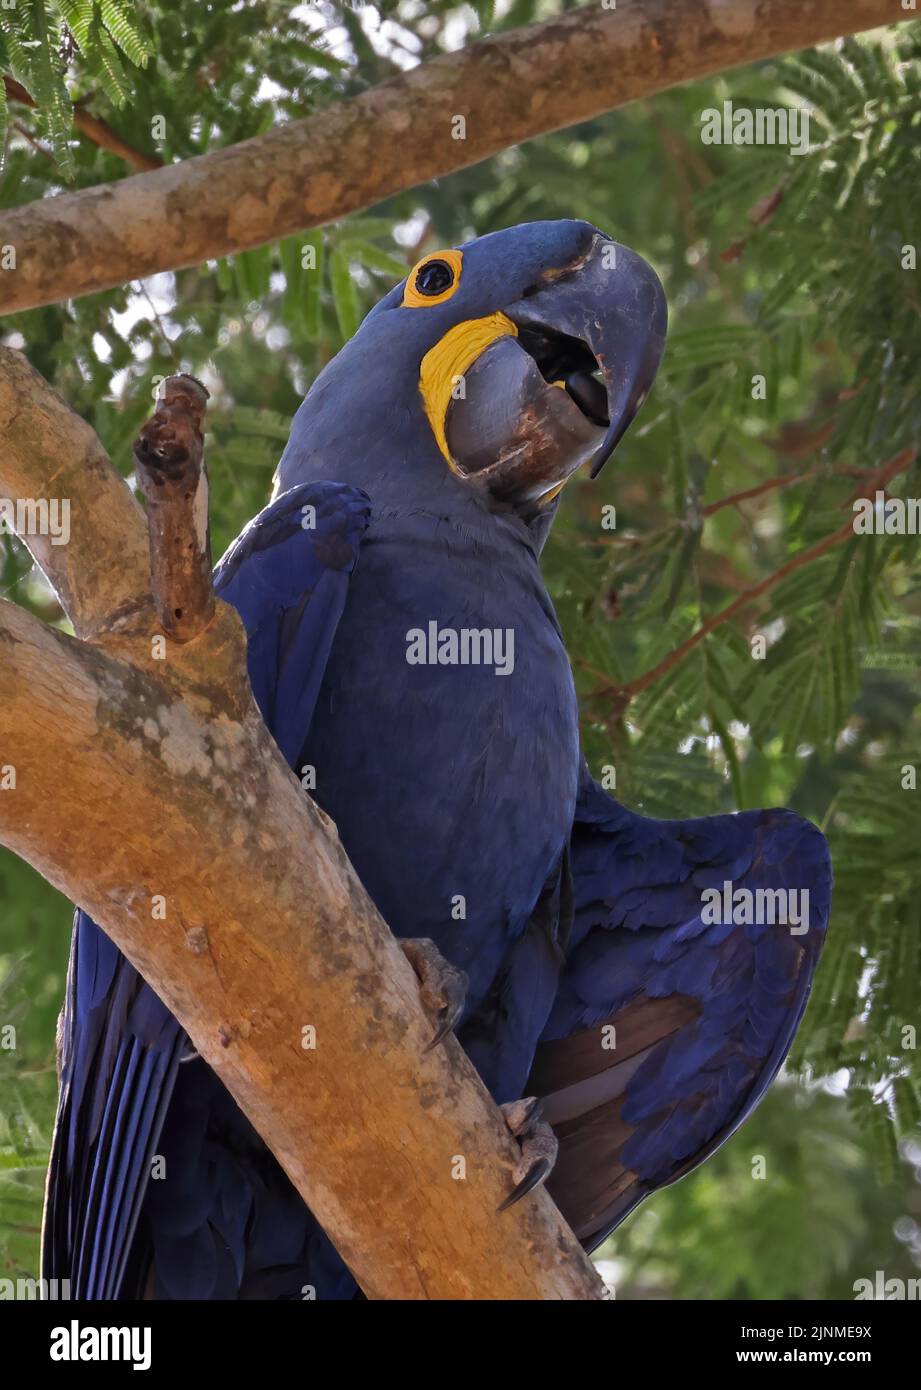 Hyacinth Macaw (Anodorhynchus hyacinthinus) close-up of adult perched in tree eating seed Pantanal, Brazil               July Stock Photo